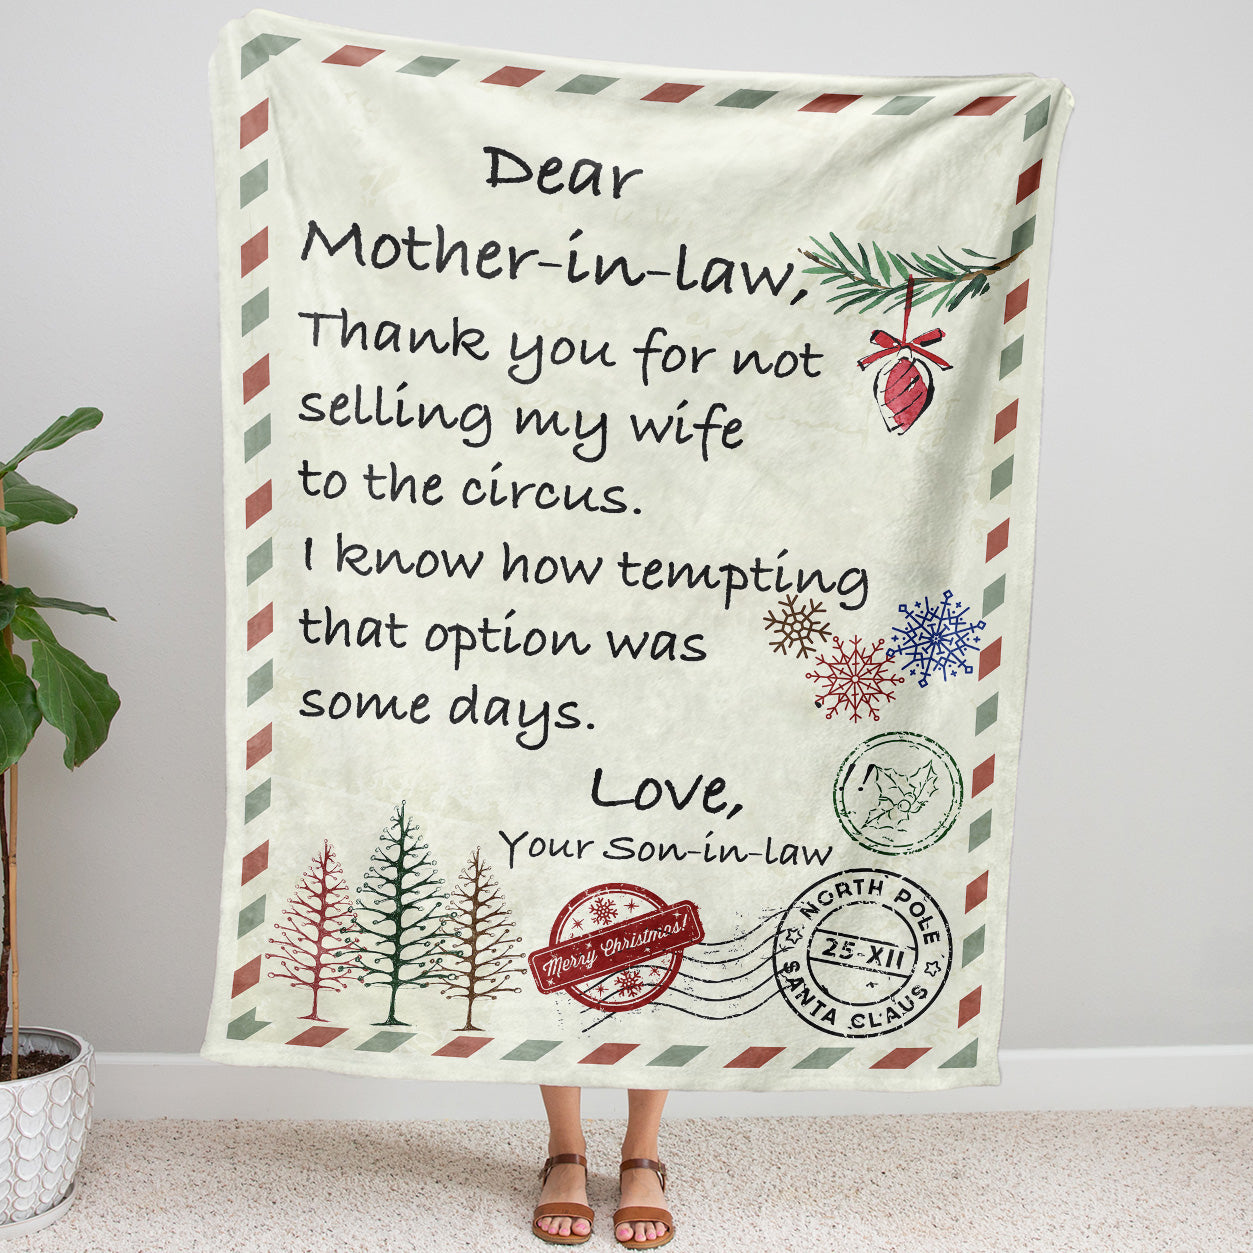 Blanket Christmas Gift ideas for Mother in Law from Son in Law Customize Personalize Love with Your Daughter 20121113 - Fleece Blanket